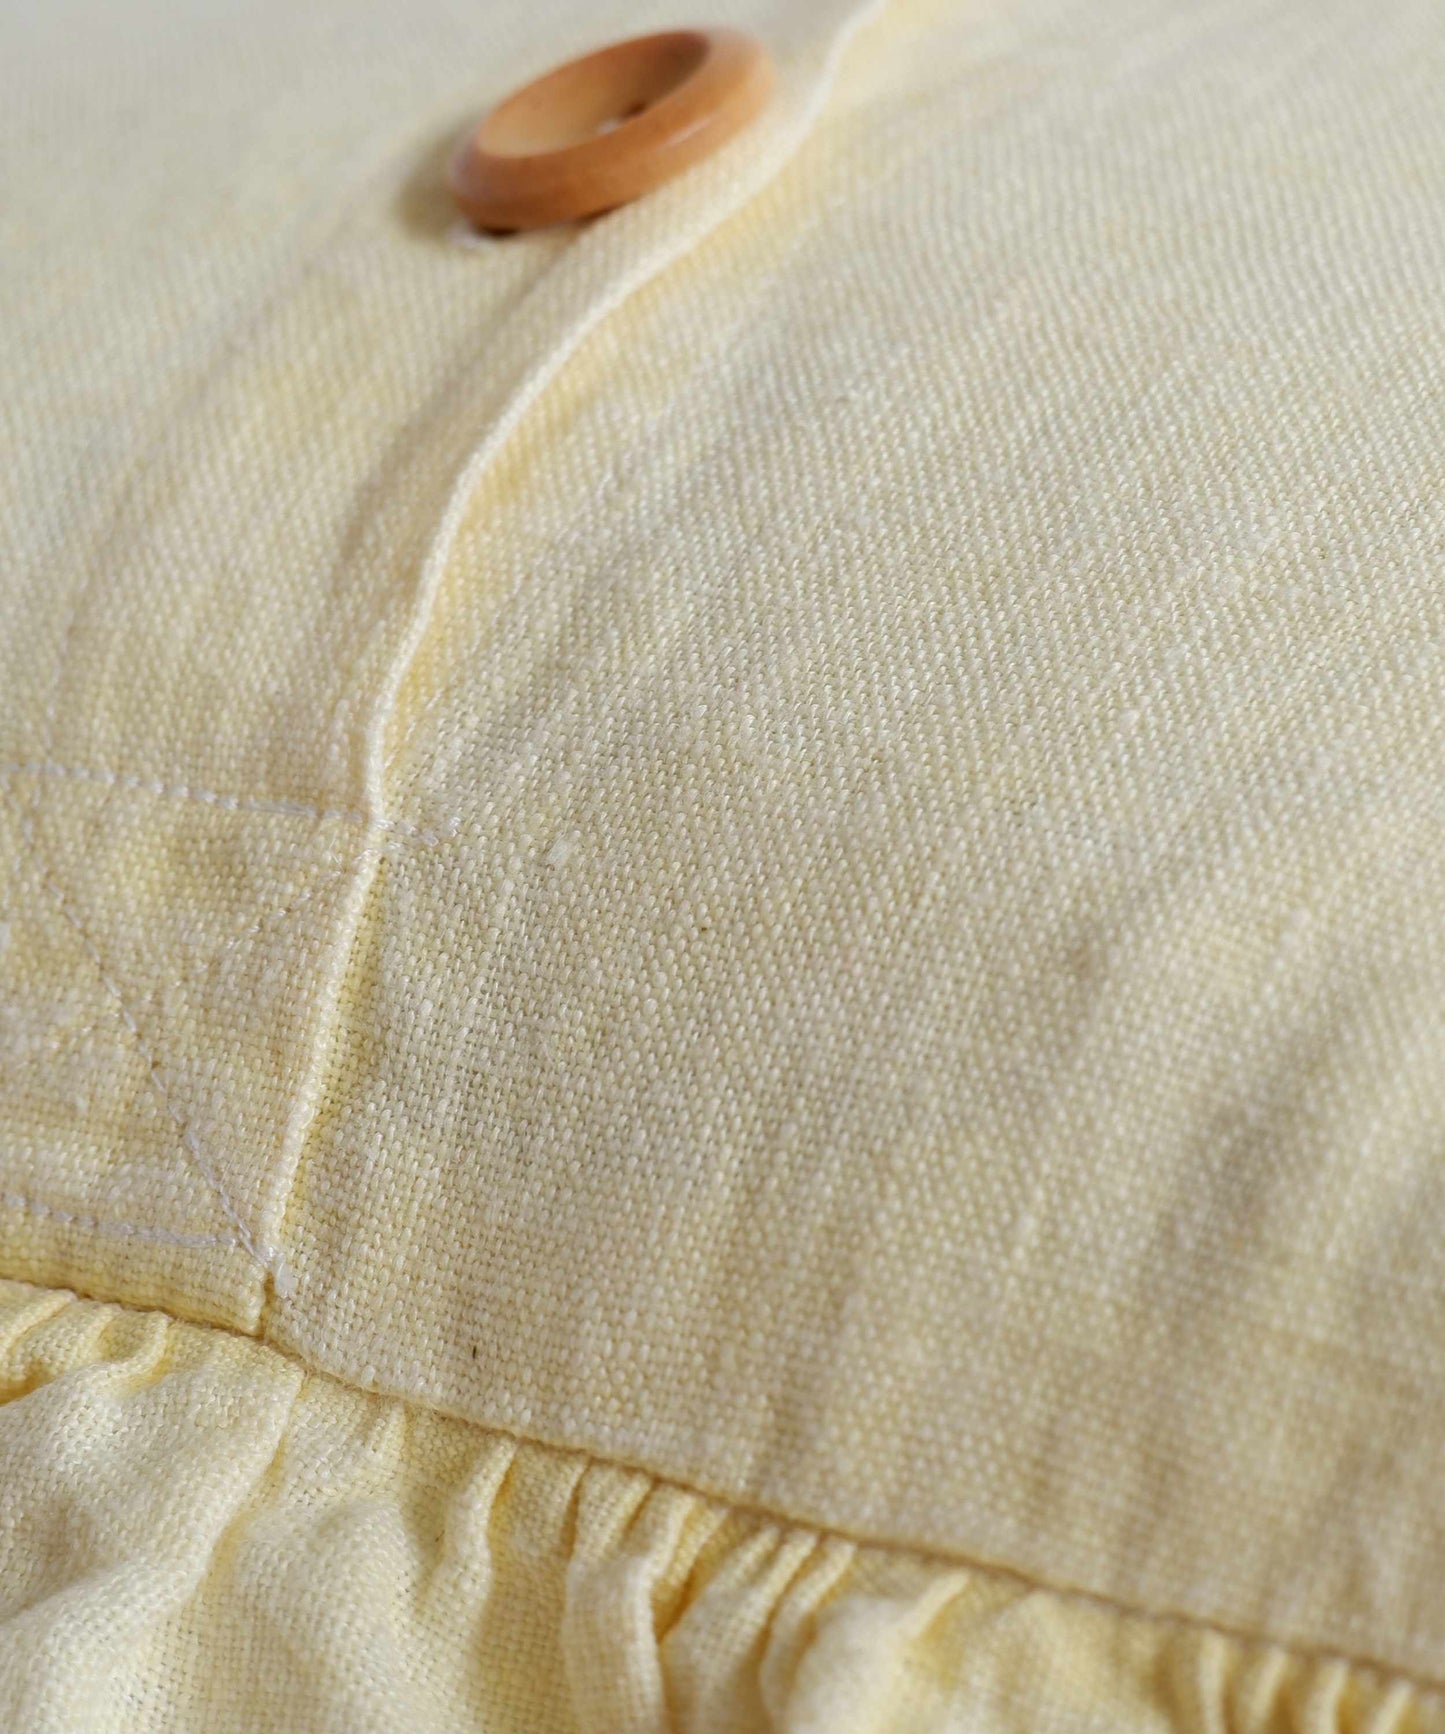 Load image into Gallery viewer, Square Ruffles Cushion in Yellow
